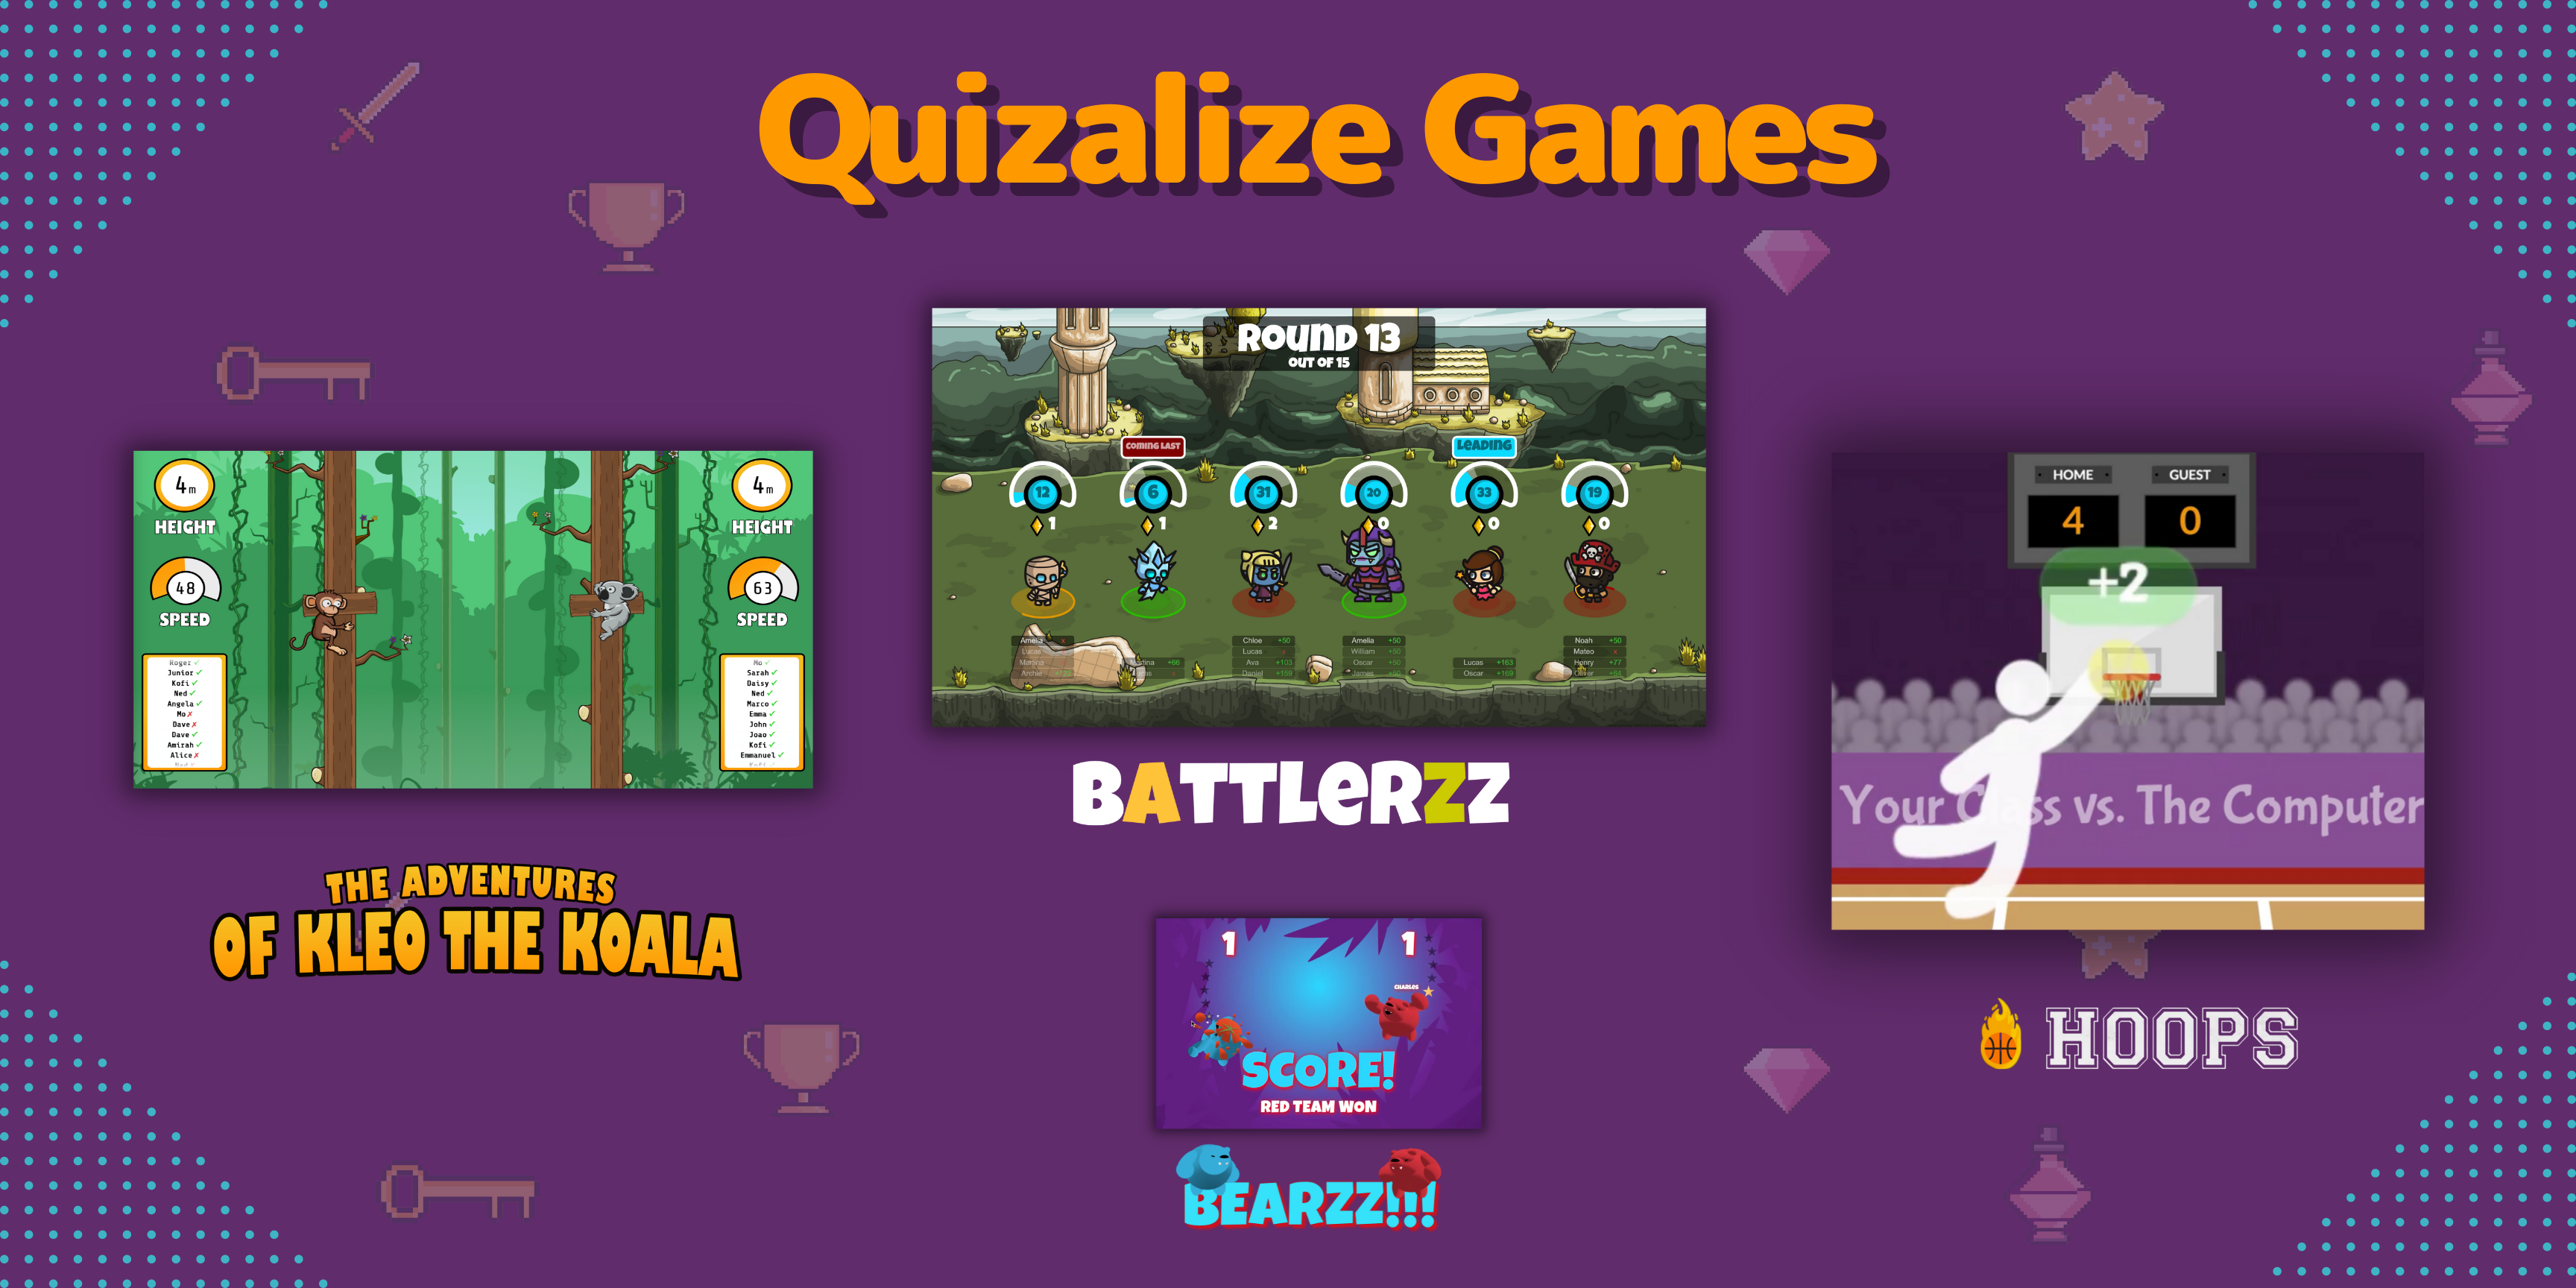 New Quizalize Games